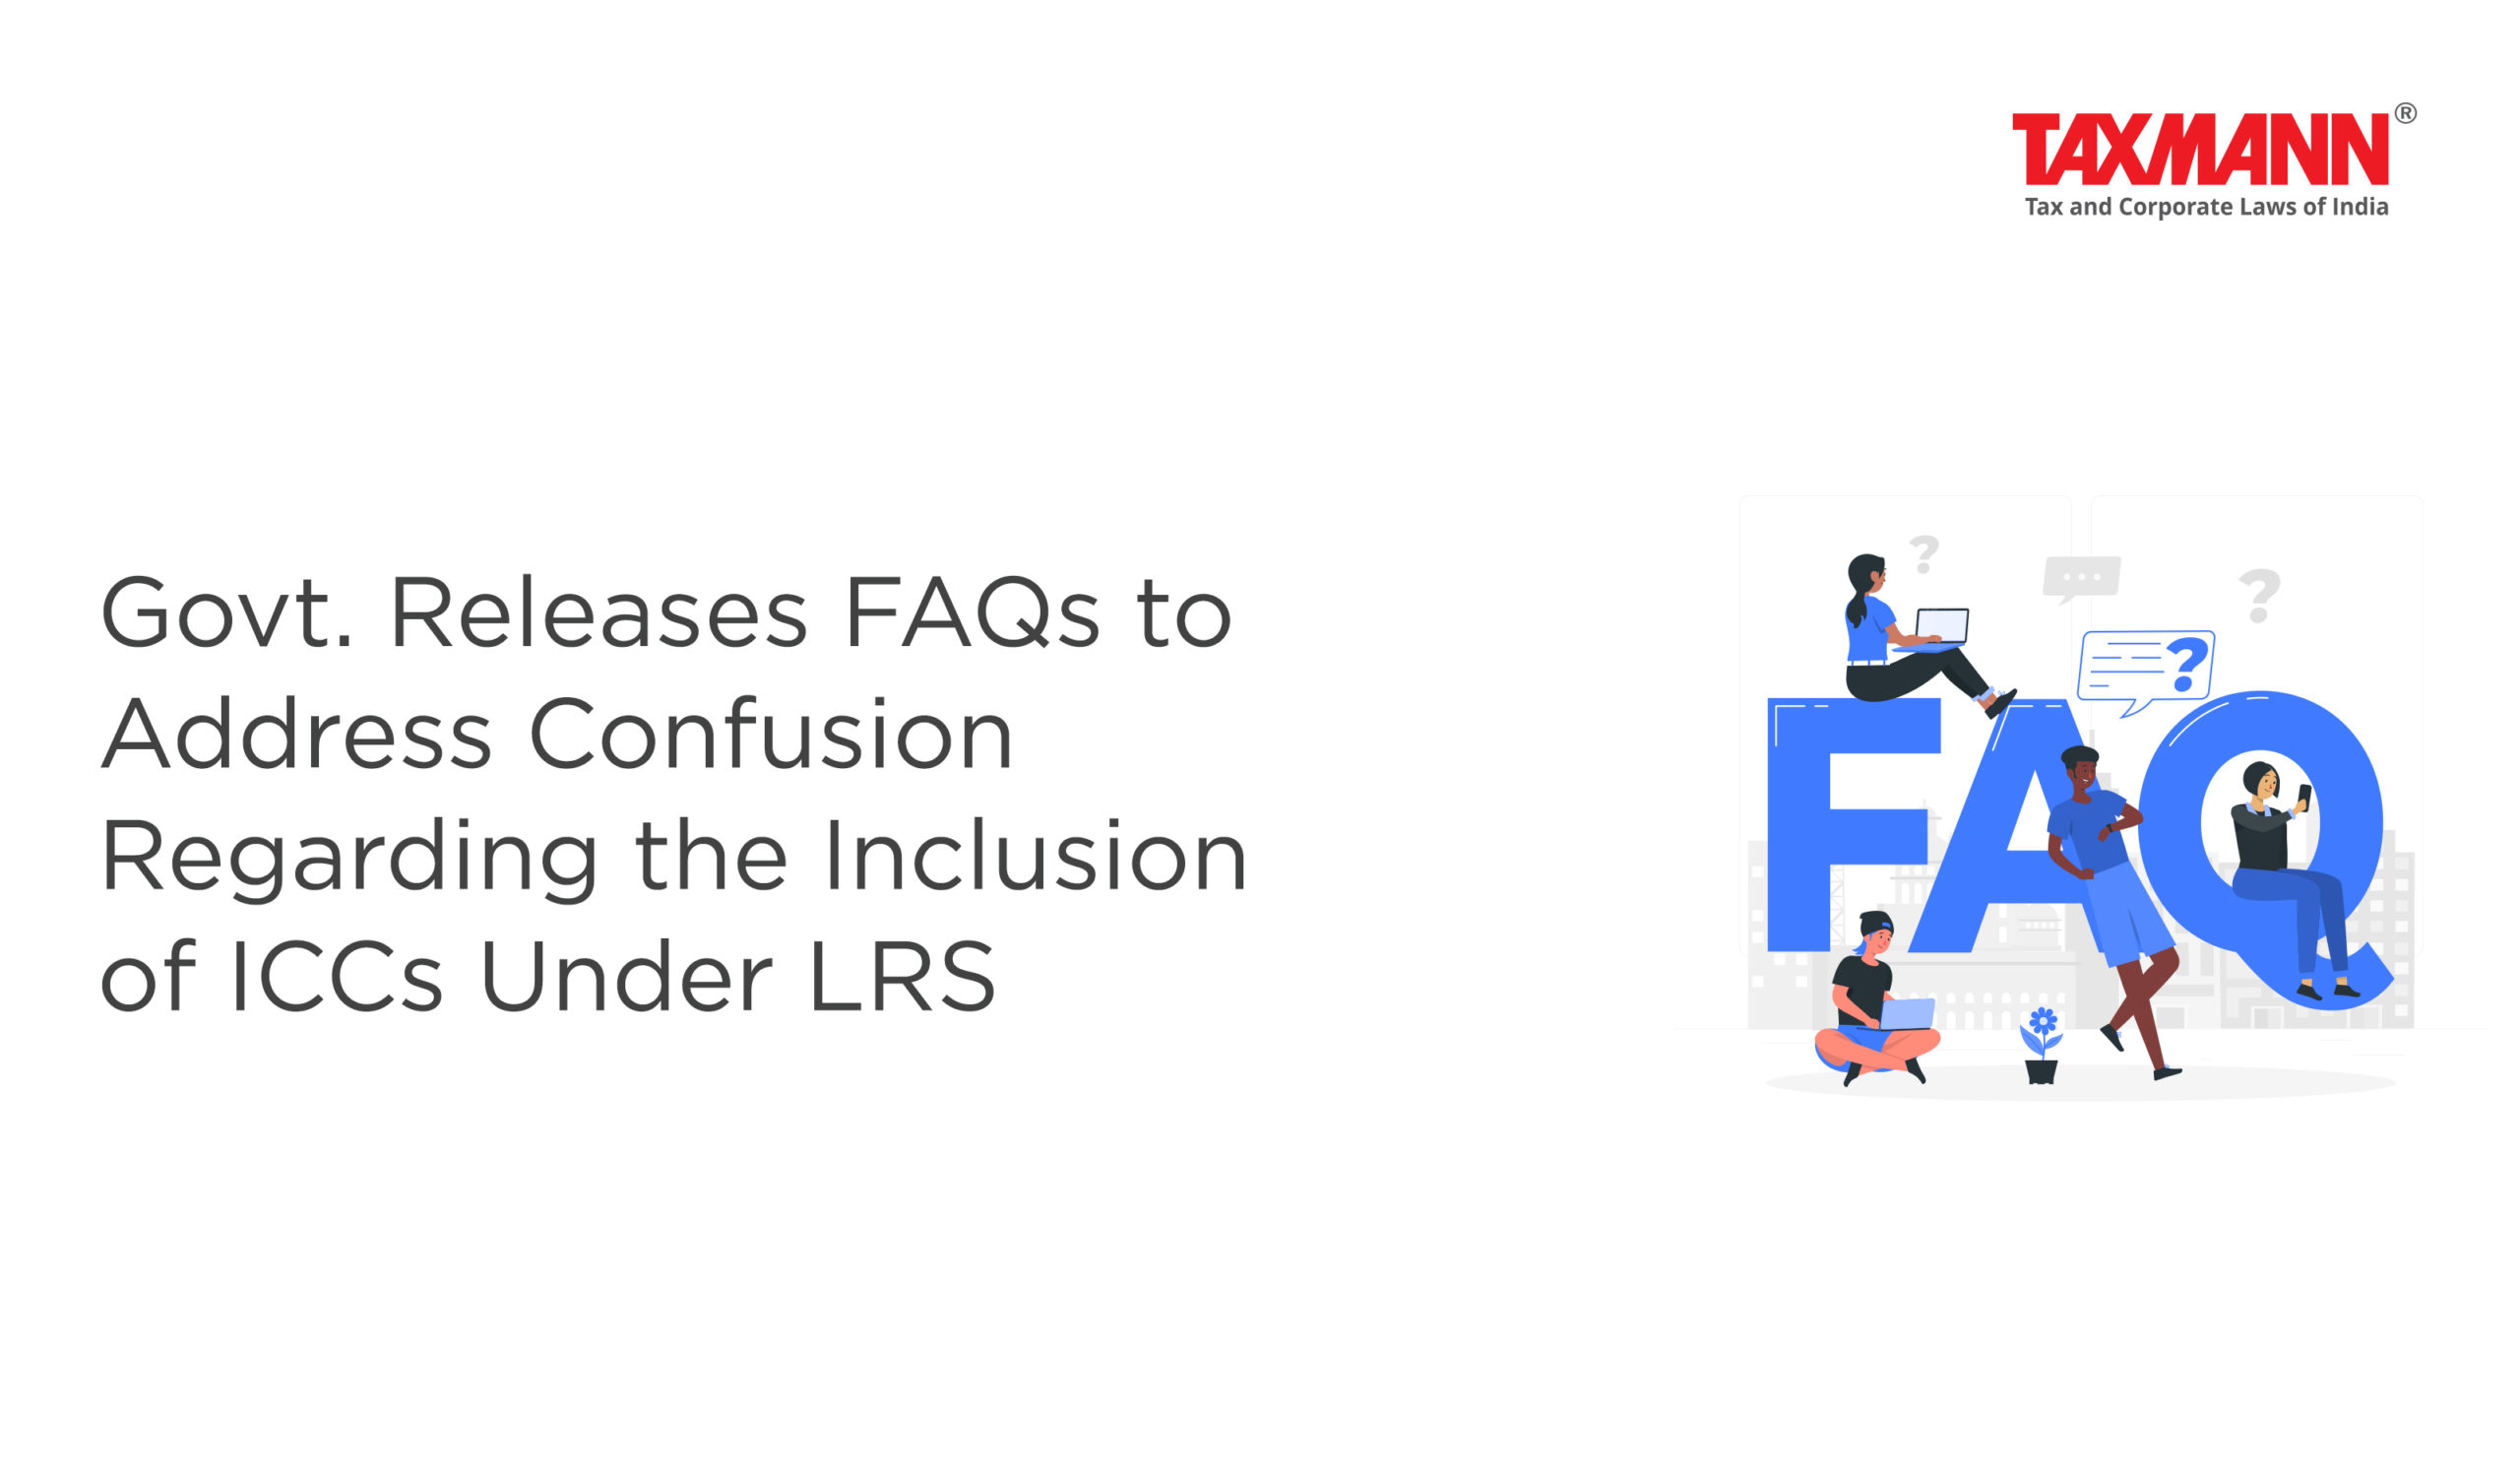 Clarifications (FAQs) on the Liberalised Remittance